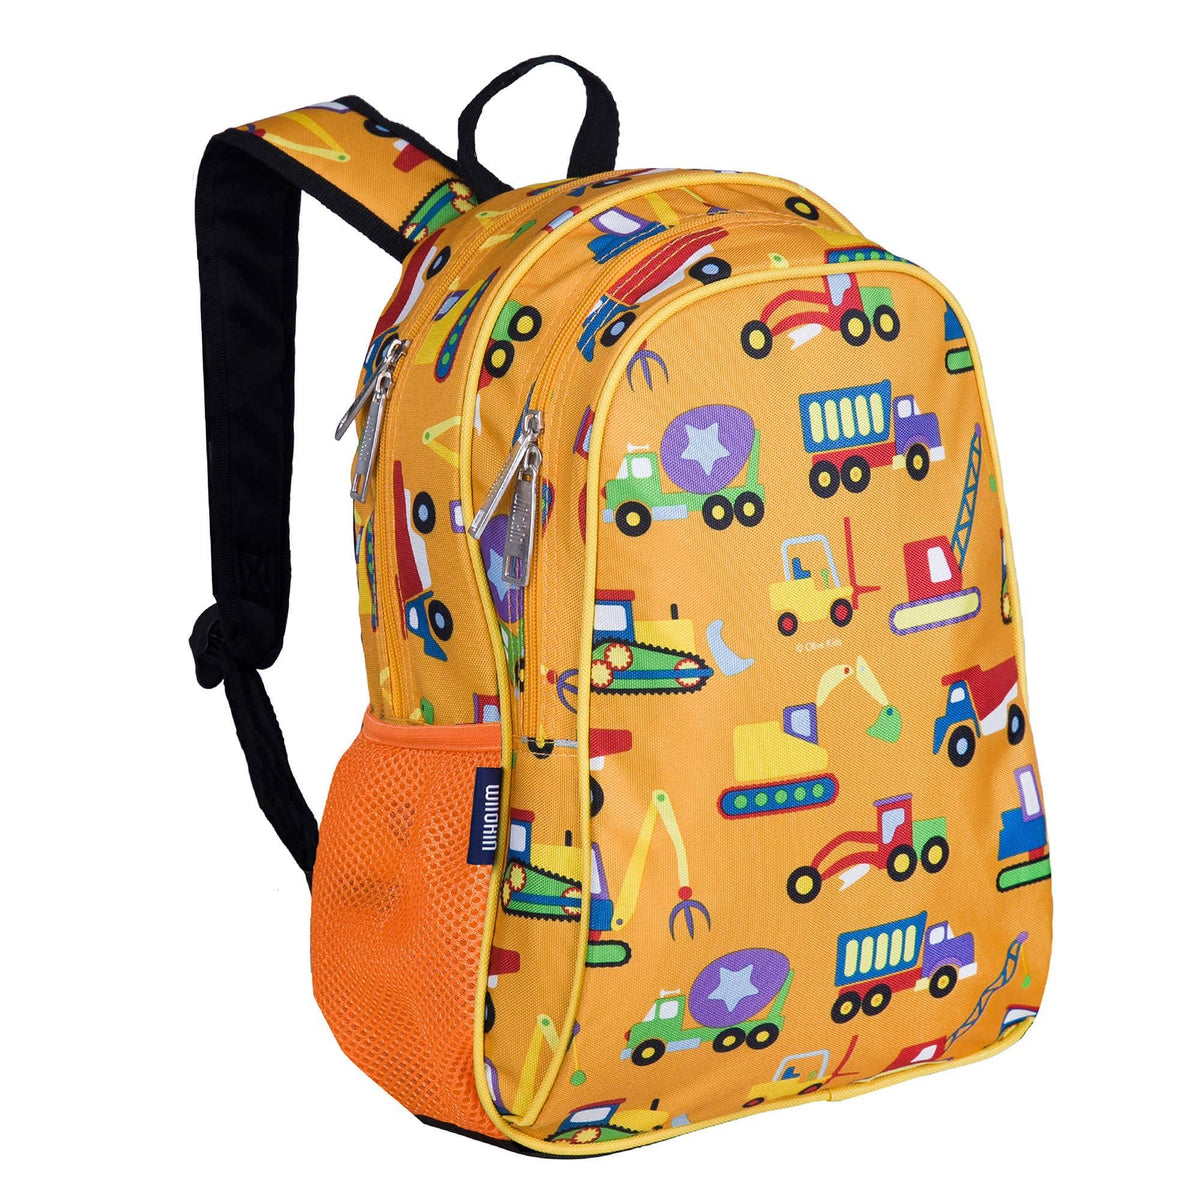 Under Construction Backpack - 15 Inch